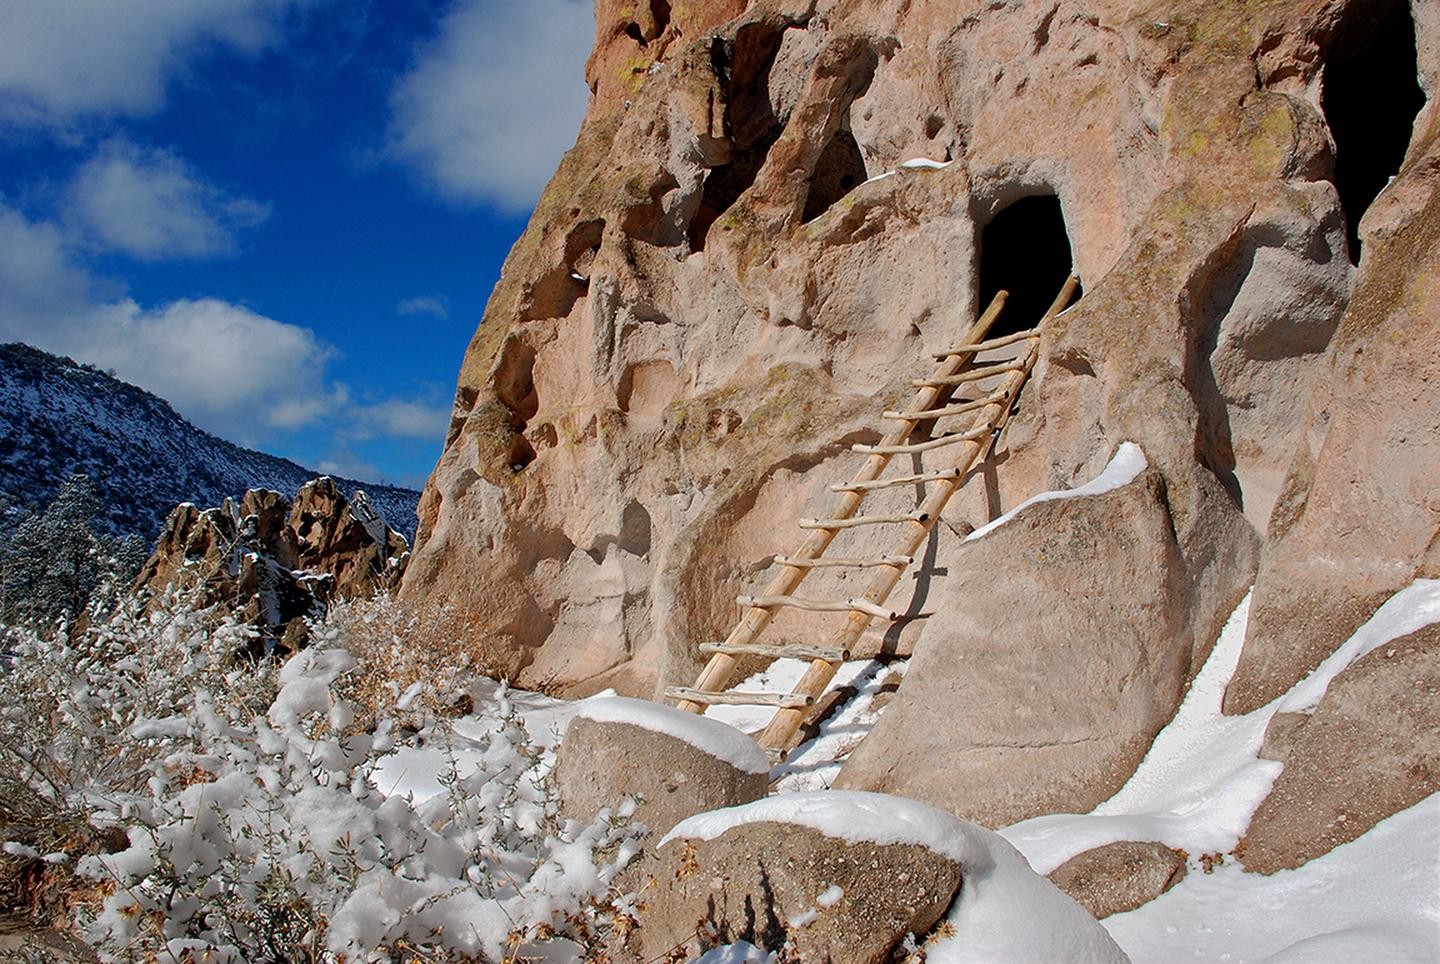 Wooden ladder leading up to a caveThe Pueblo Loop Trail is home to the excavated archaeological sites within Bandelier National Monument. Park visitors are able to climb ladders and explore some of the archaeological sites.